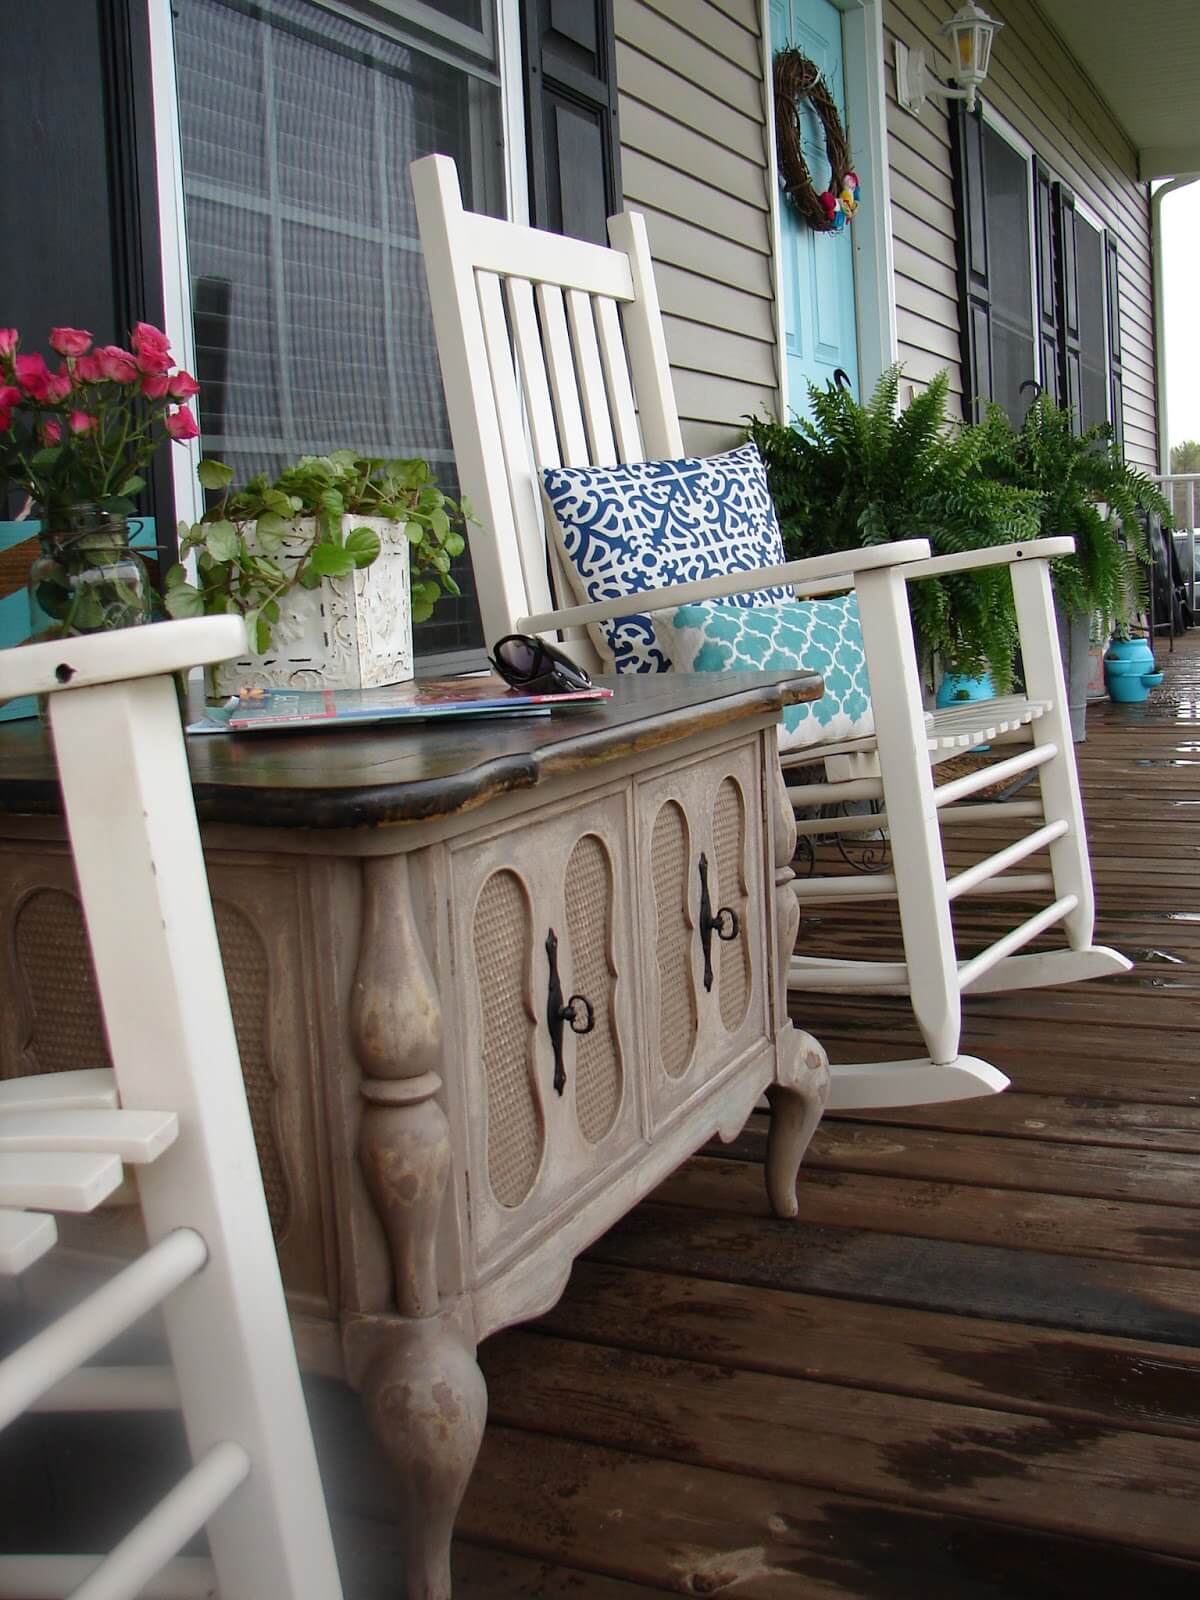 Wooden Table, Rocking Chairs, and Patterned Pillows